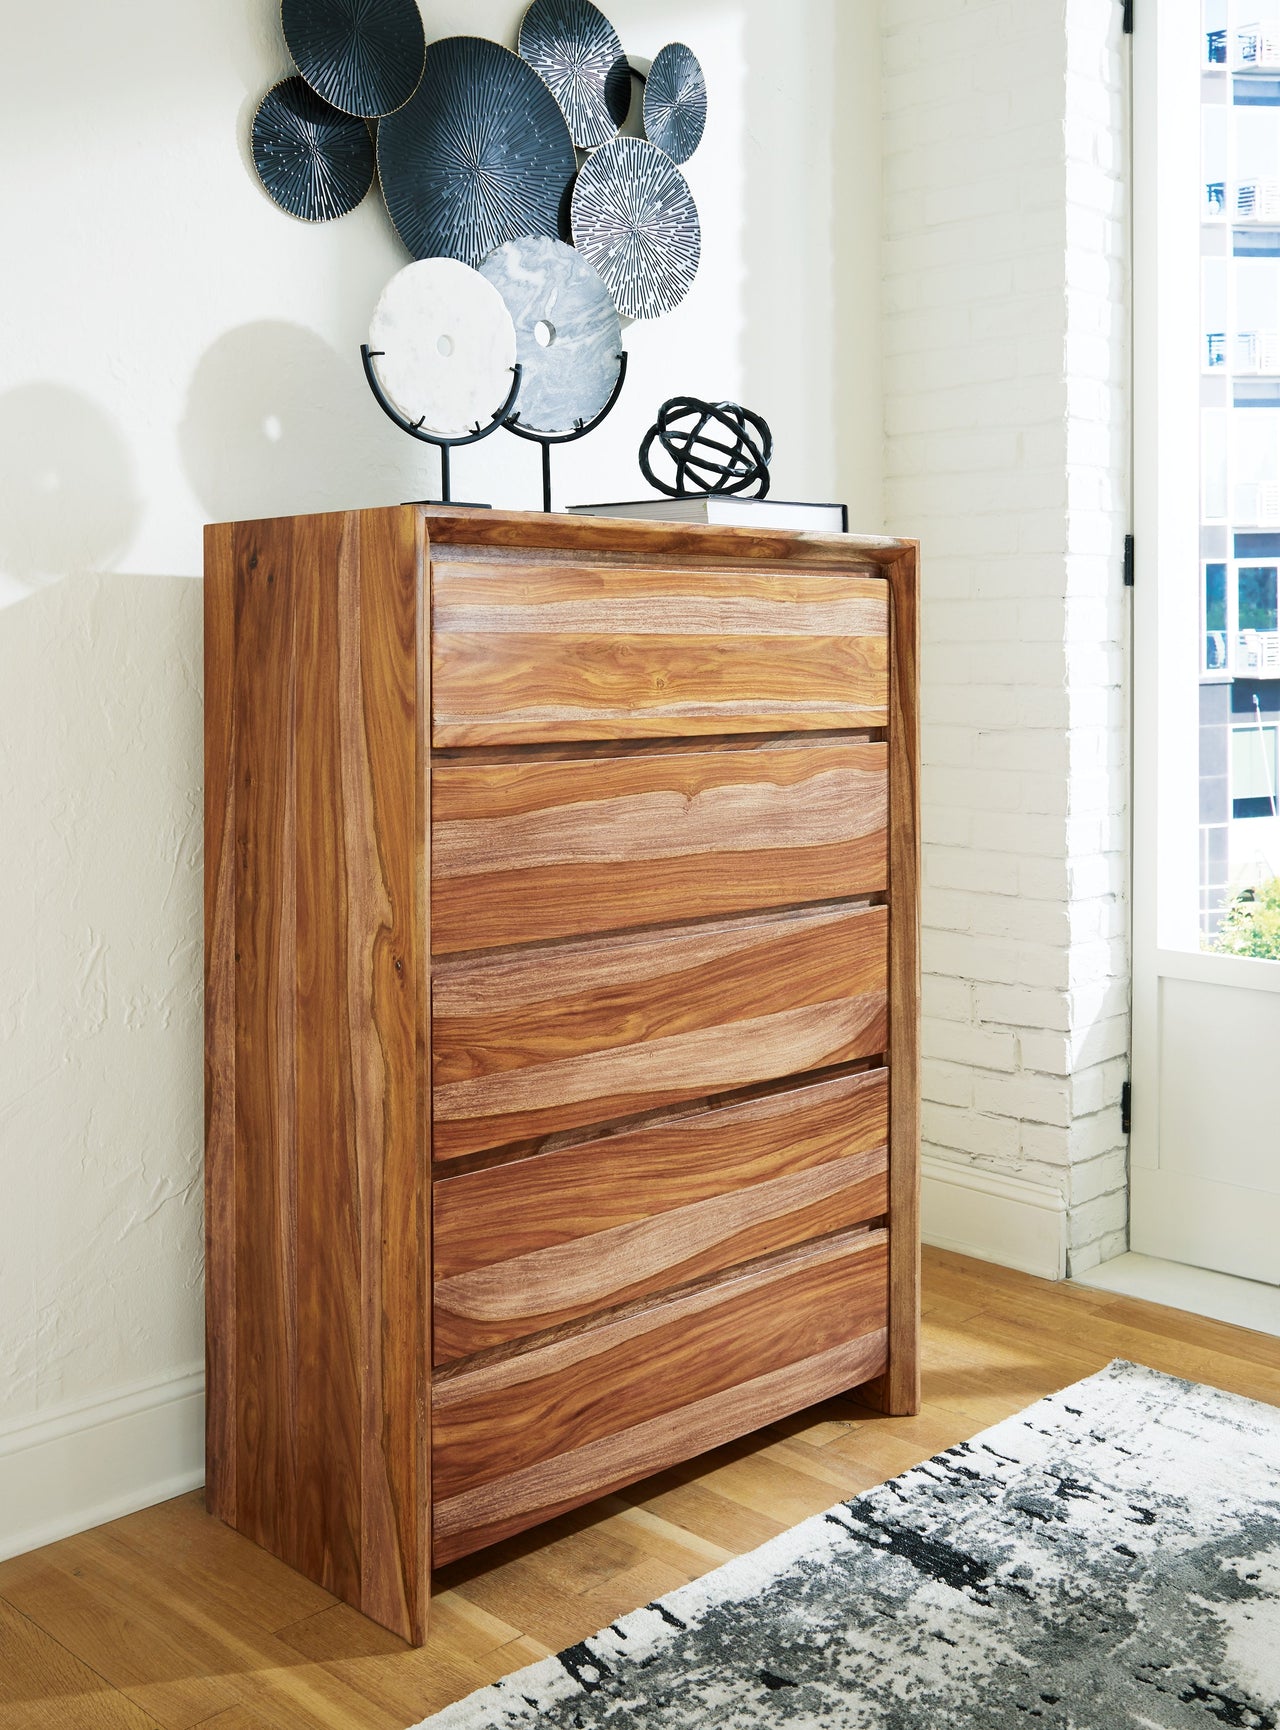 Dressonni - Brown - Five Drawer Chest - Tony's Home Furnishings